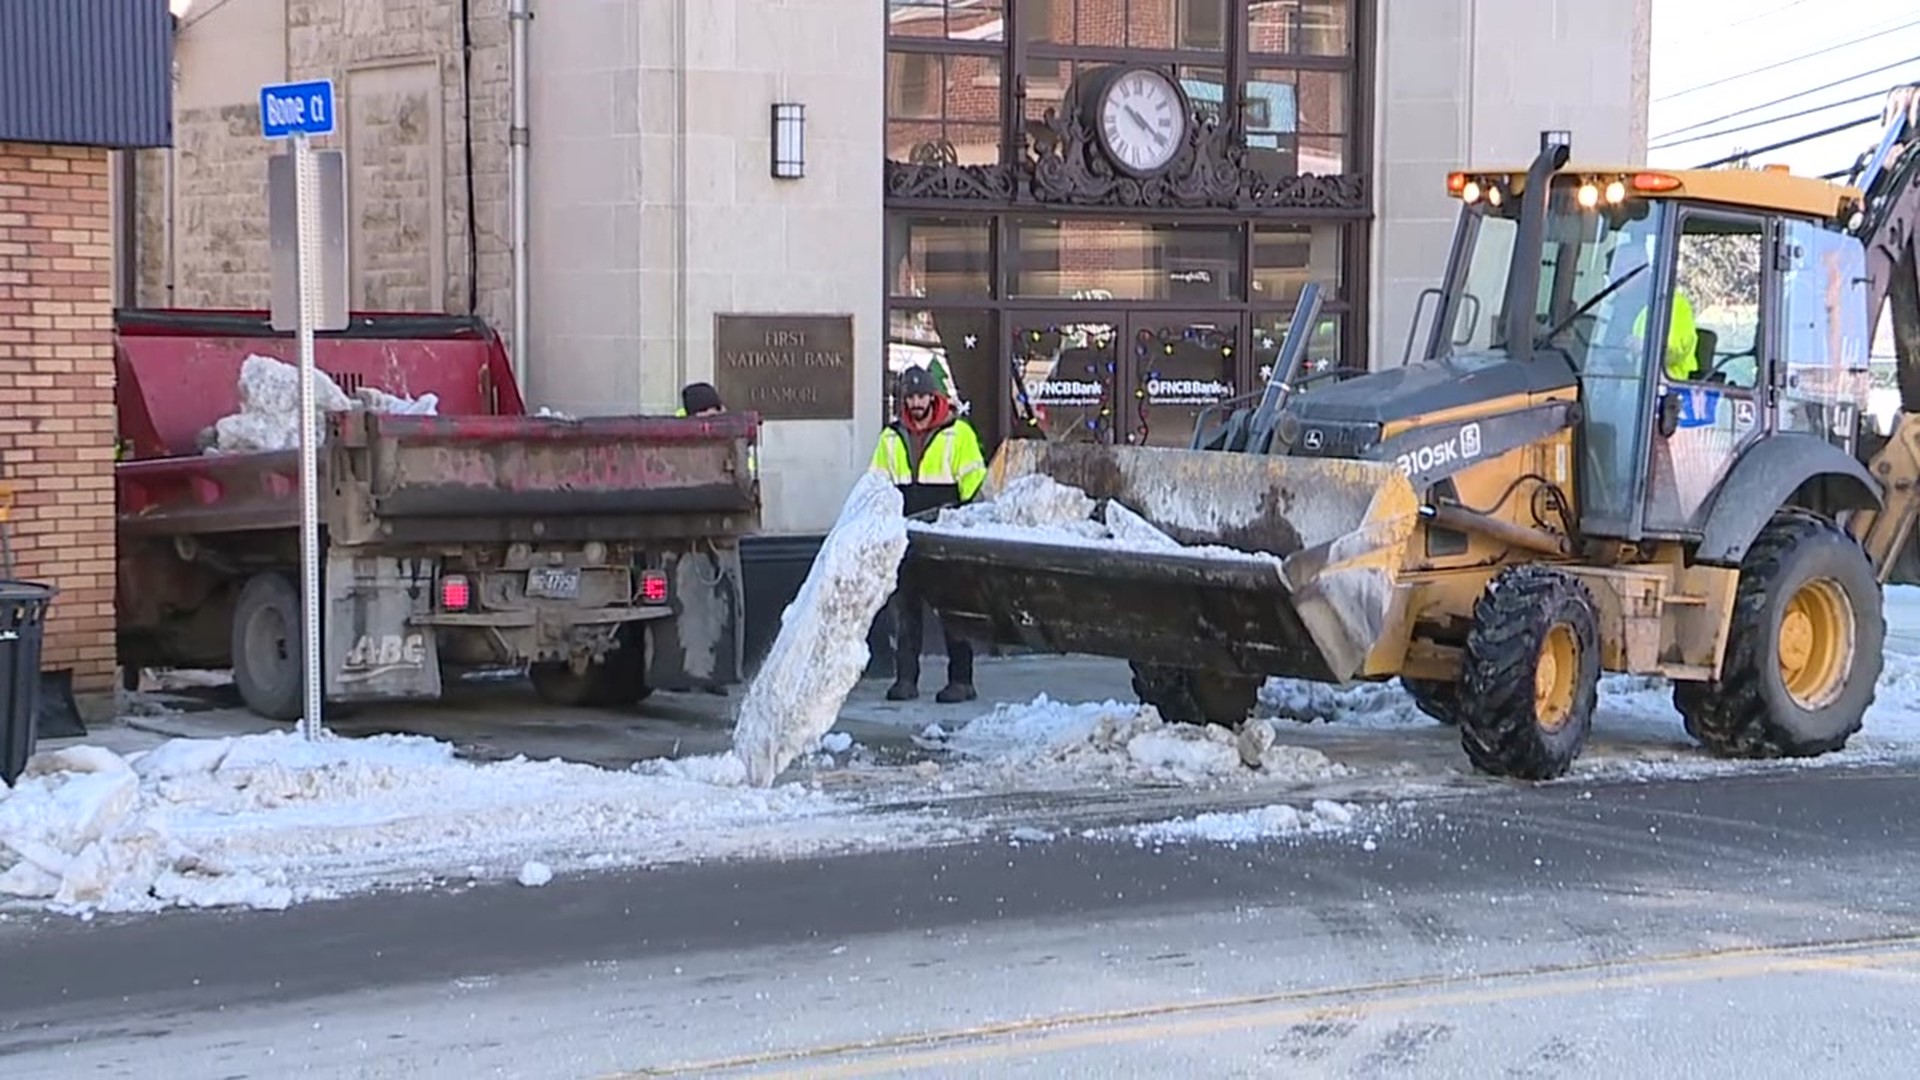 Borough workers used heavy equipment on Wednesday morning to break up and remove piles of ice and snow.